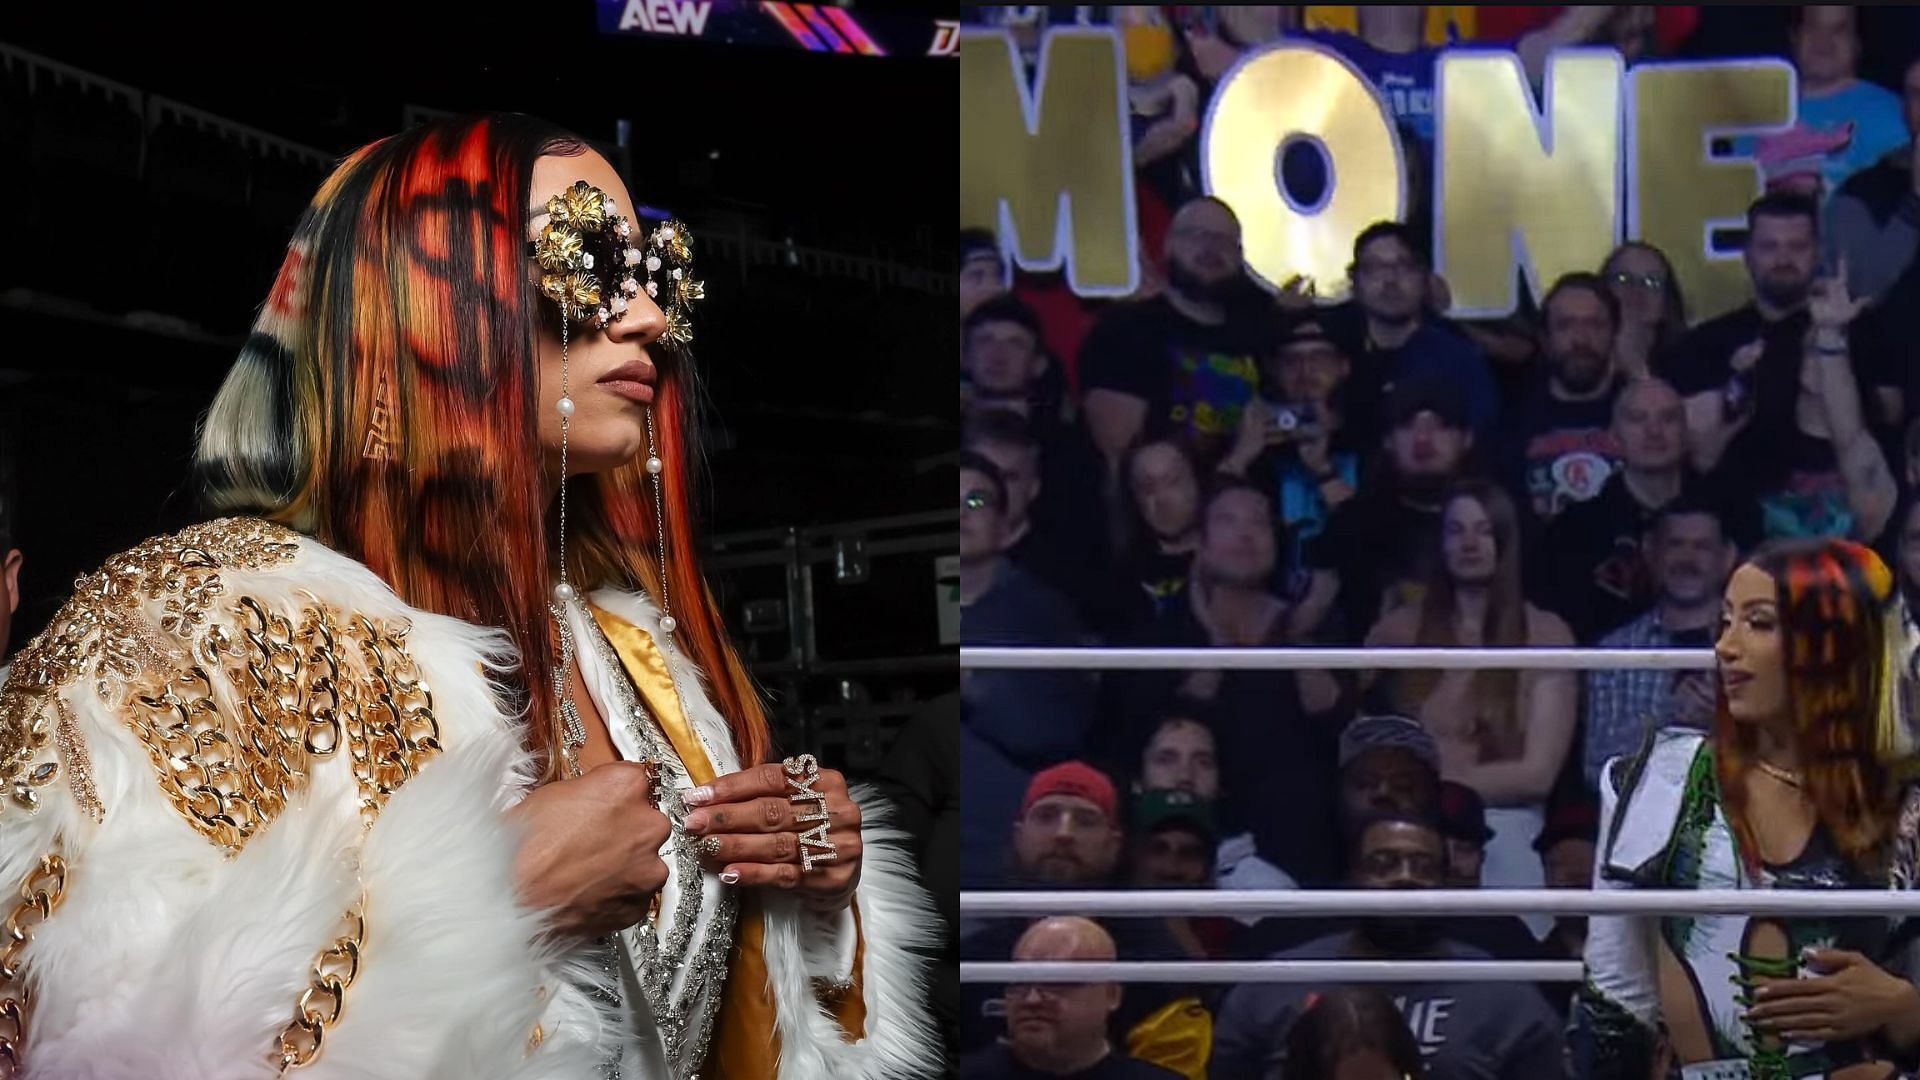 Mercedes Mon&eacute; made her first AEW appearance tonight at Big Business [Photo courtesy of AEW